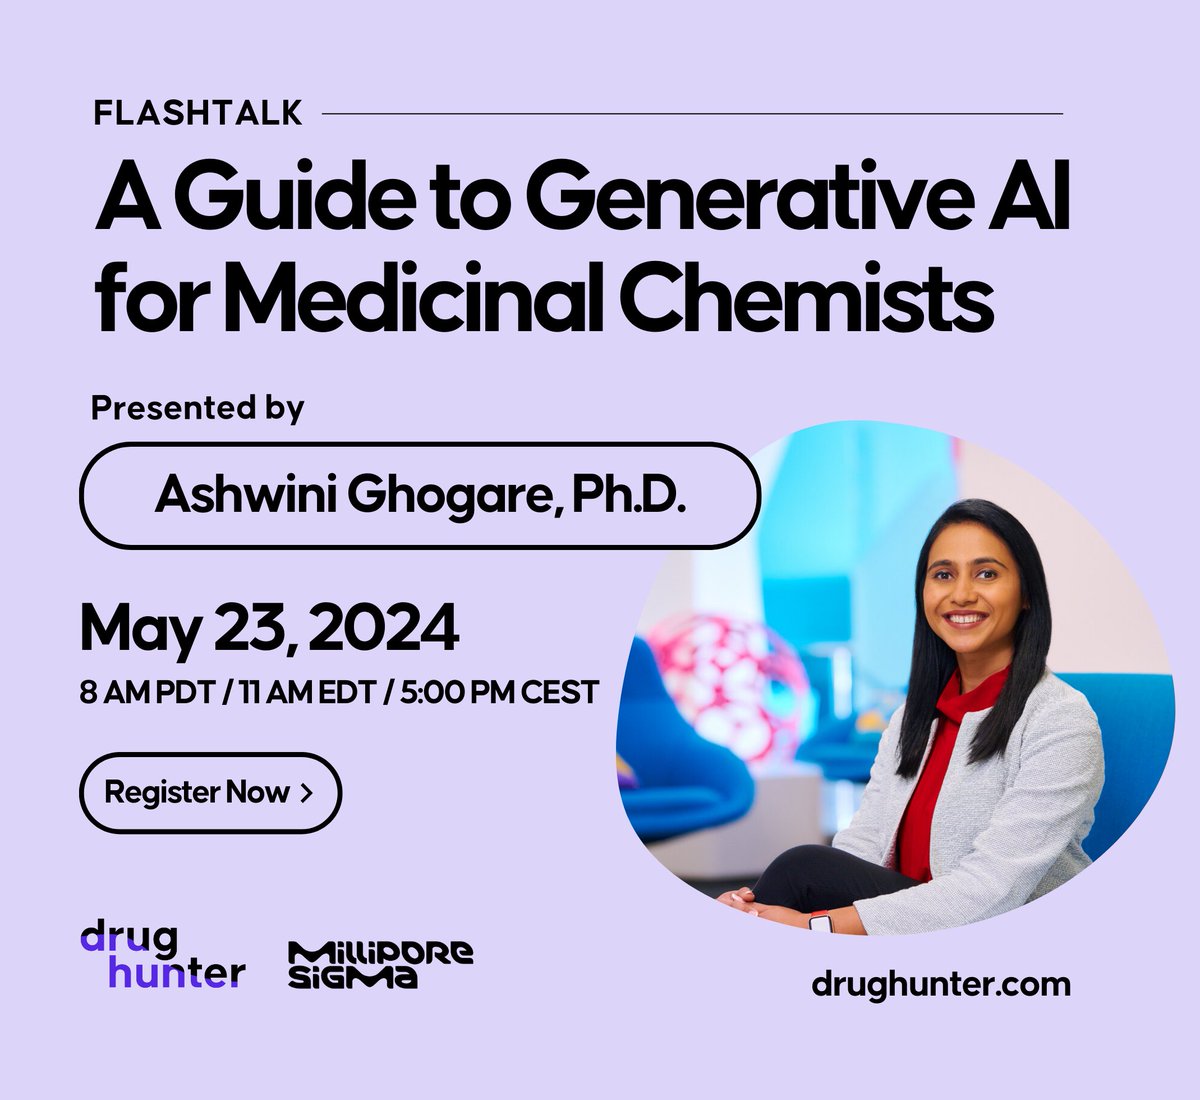 A Guide to Generative AI for Medicinal Chemists | drughunters.com/3JSMTNq

Thursday, May 23 
8:00am PDT // 11:00 am EDT // 5:00 pm CEST

In this Flash Talk, Ashwini Ghogare explores how Medicinal Chemists can benefit from Using Generative AI.

#drughunter